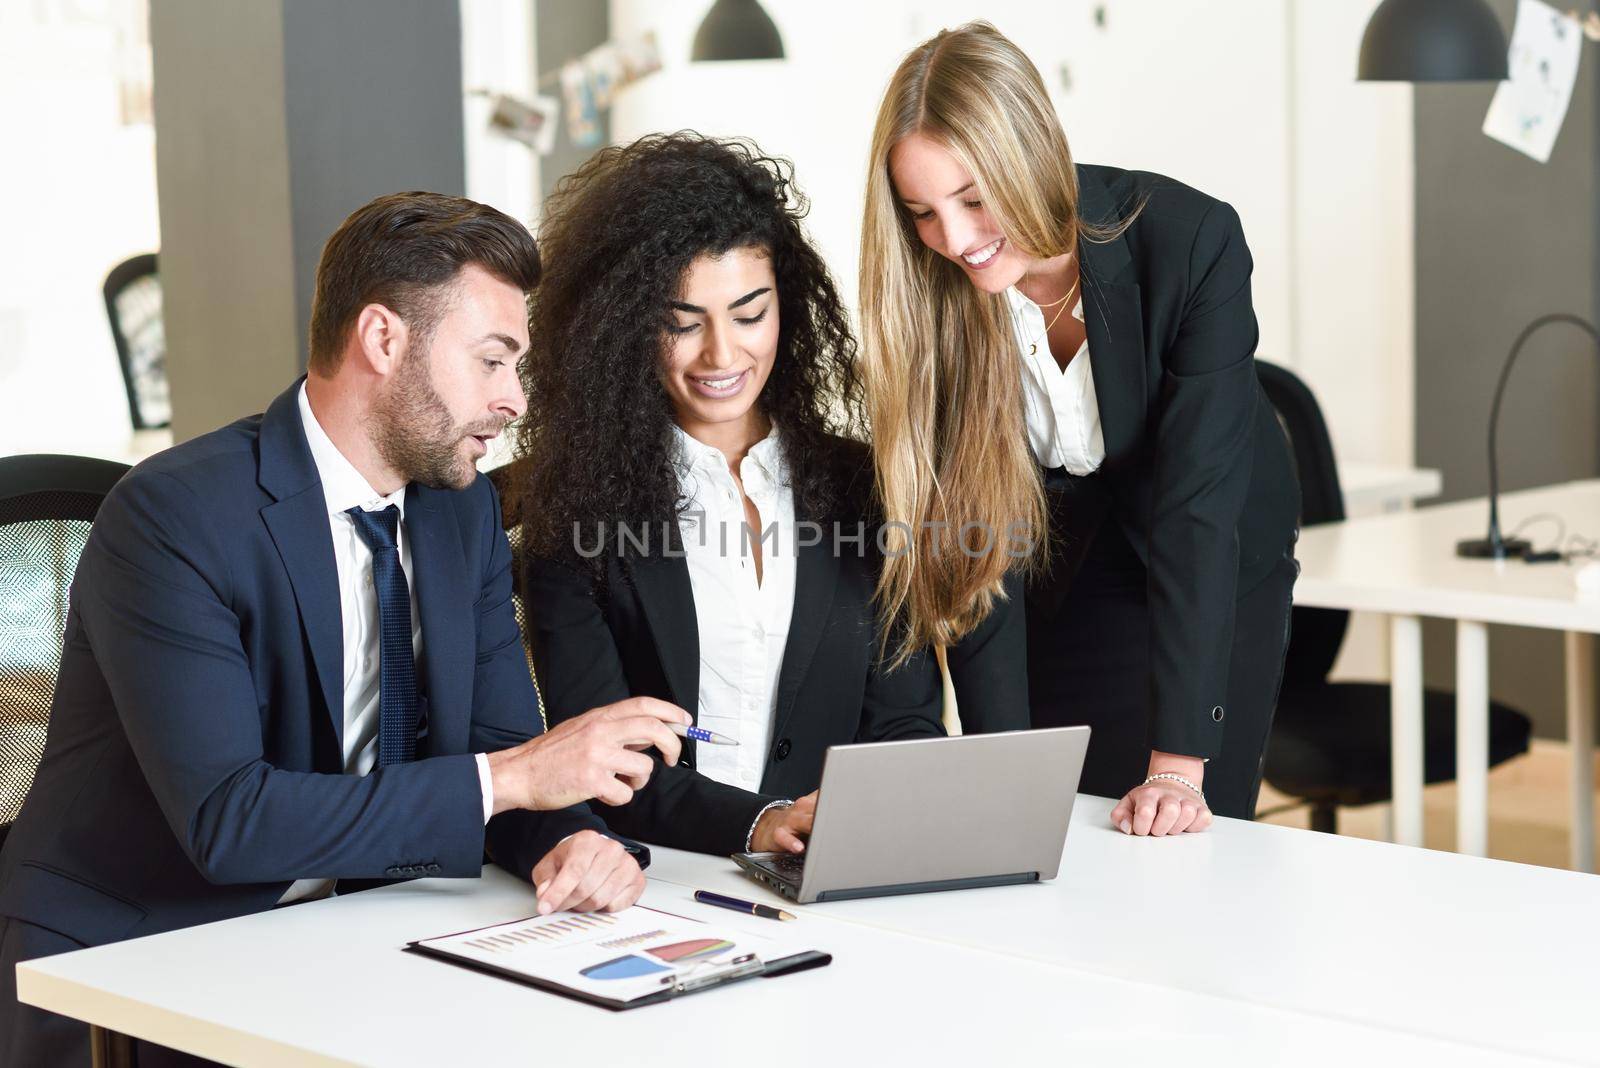 Multi-ethnic group of three businesspeople meeting in a modern office. Two women and a caucasian man wearing suit looking at a laptop computer.